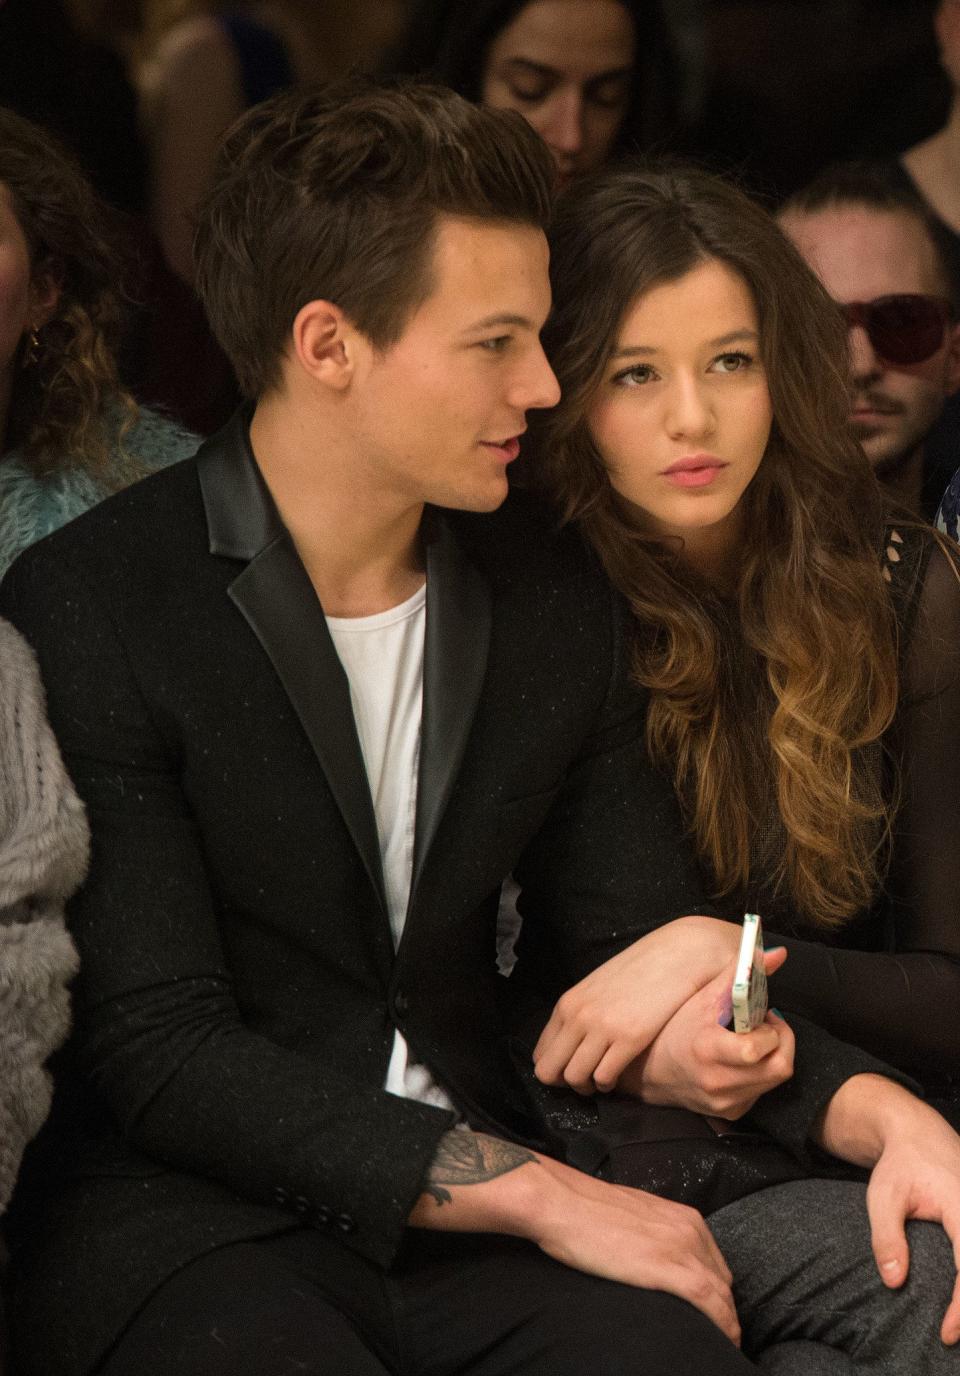 Louis and Eleanor sitting together at a show